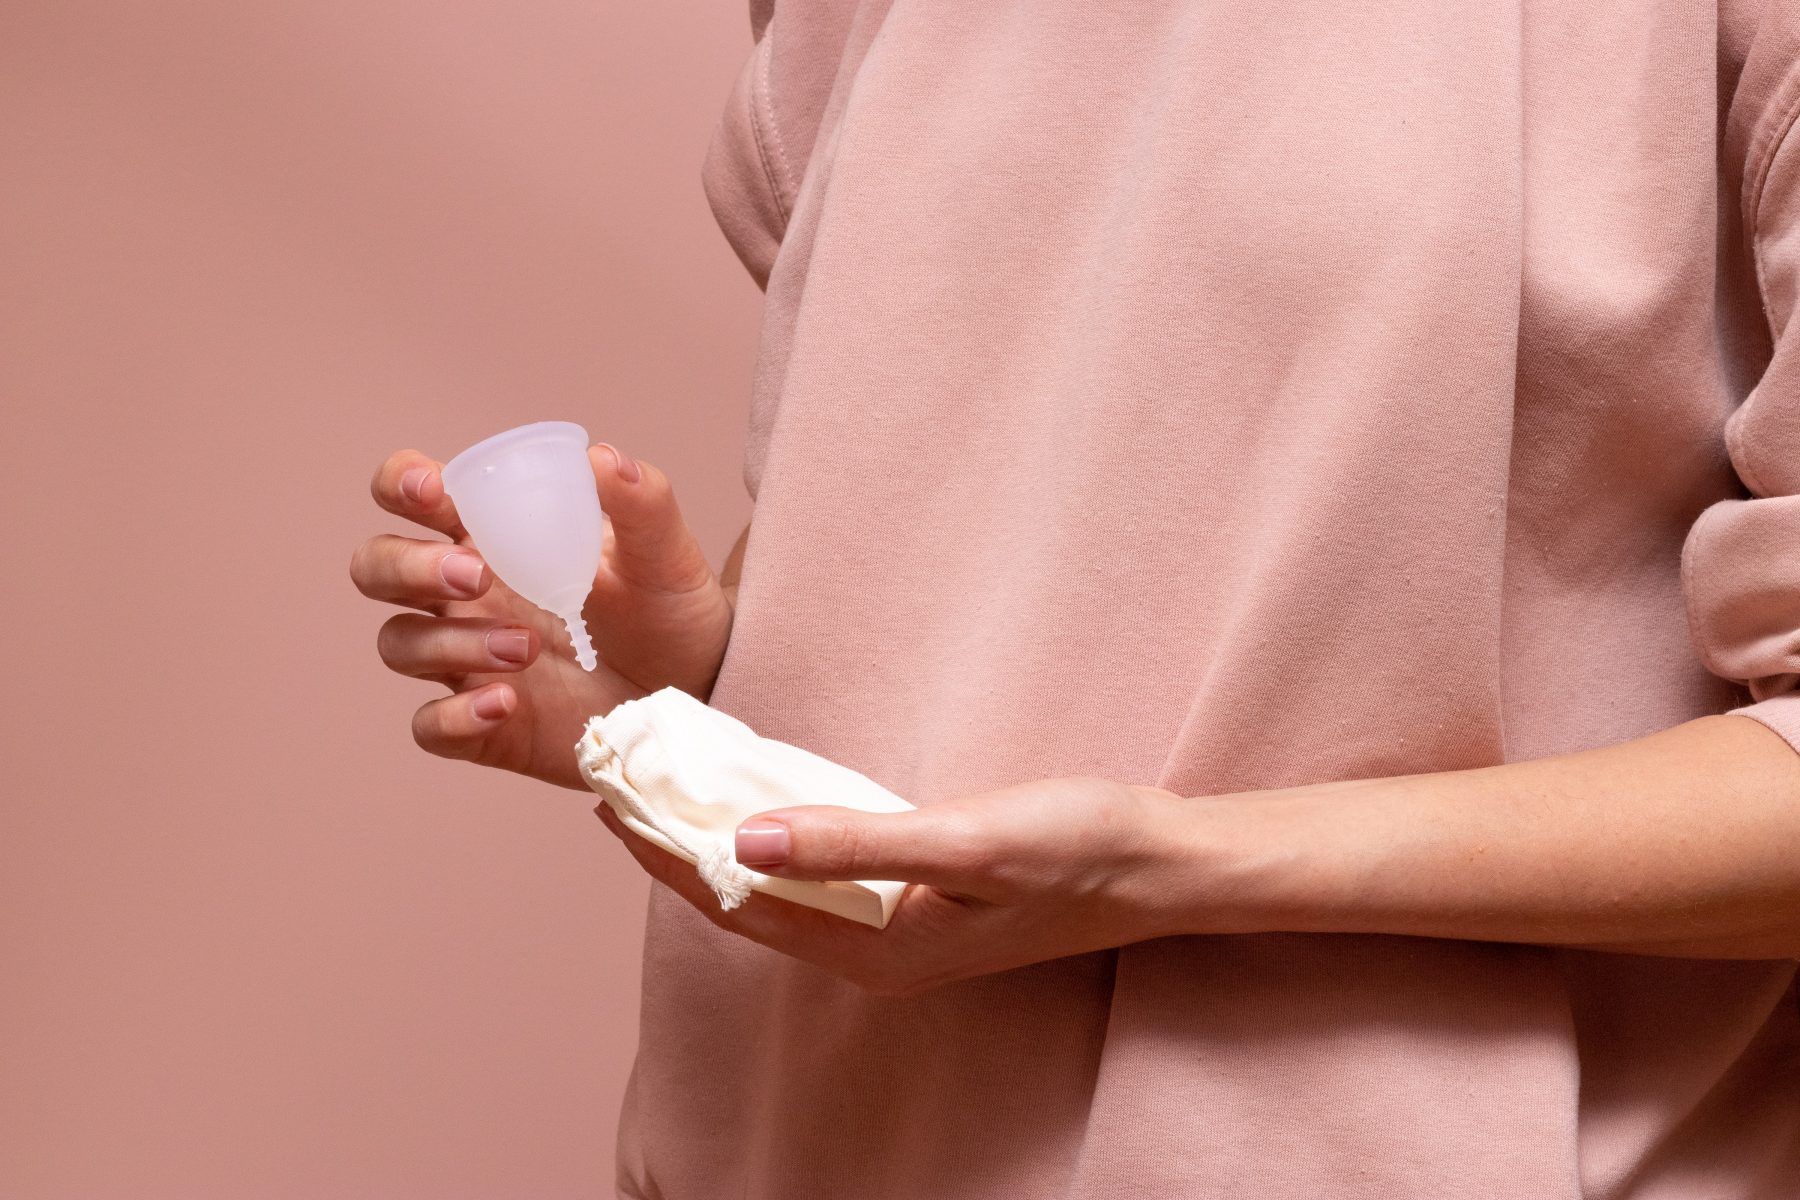 11 eco-friendly menstrual products to try for your next cycle